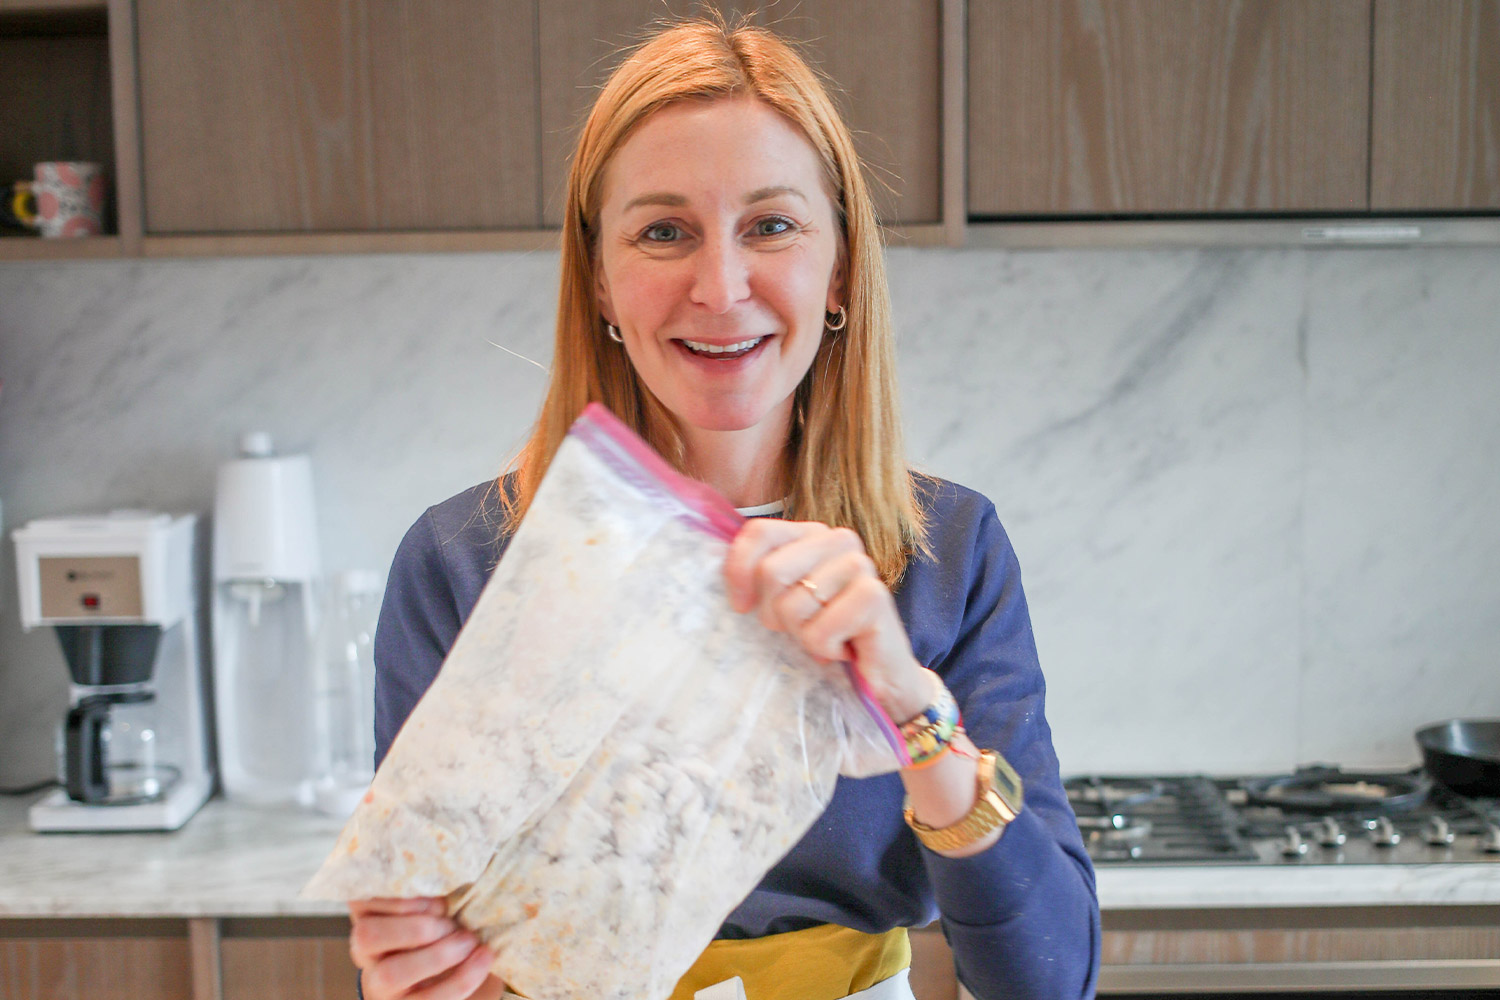 Woman stands in kitchen holding plastic bag filled with puppy chow